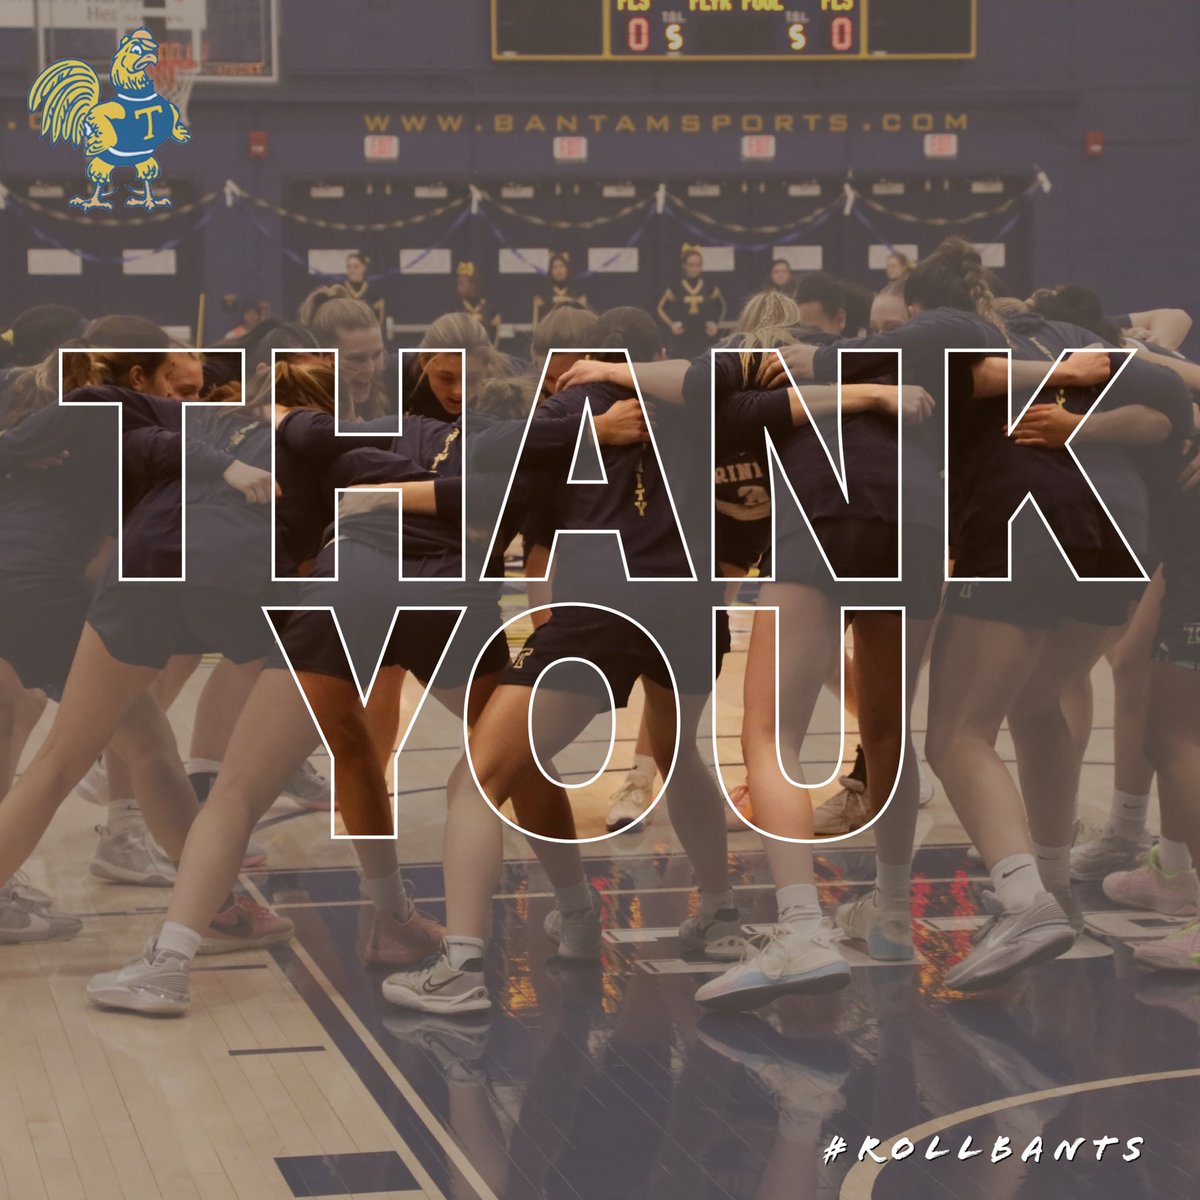 A huge thank you to our families, friends & all who supported us this season. While it’s always hard to have our journey come to an end, we’re grateful for the ride. An especially big thank you to our 3 seniors, who gave their all for this program and family 💙💛 #RollBants